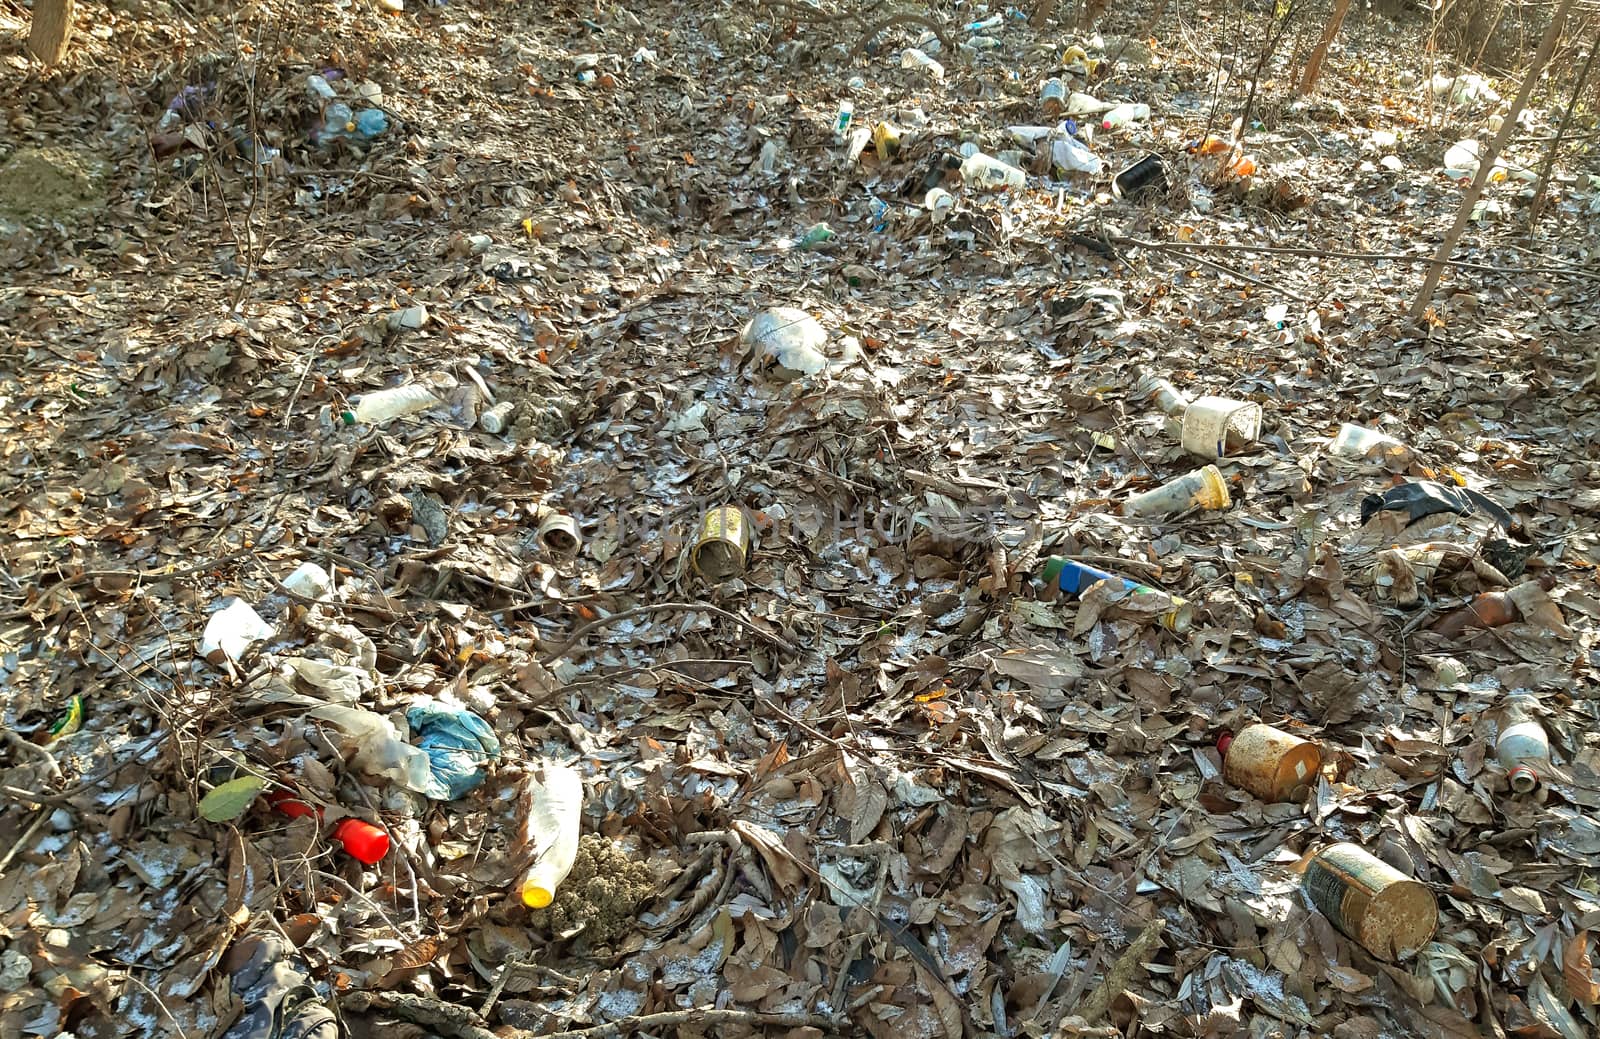 Ecological Disaster, garbage thrown into nature, polluting nature by Mindru